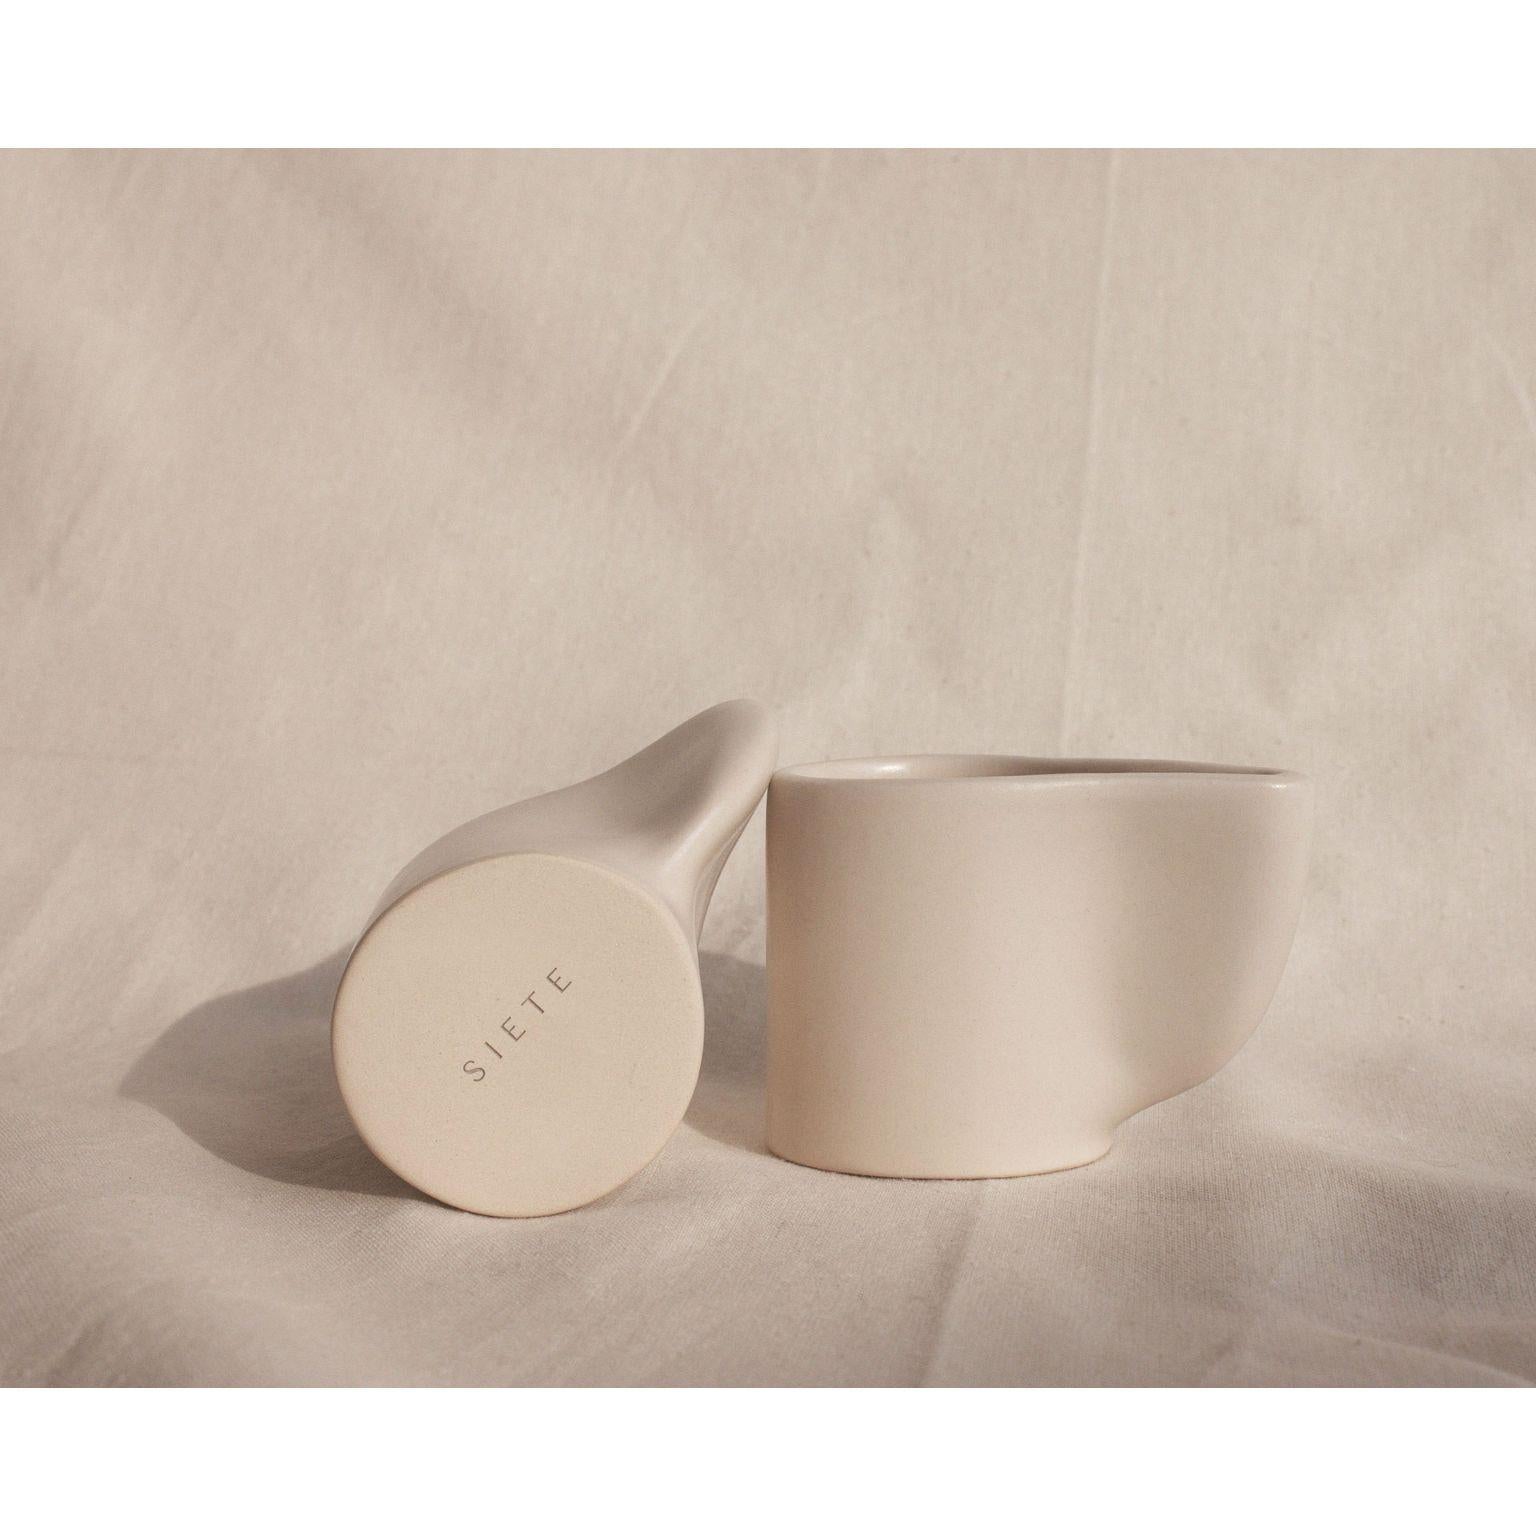 Mila Espresso Set by Siete Studio
Dimensions: D8.5 x W5 x H6 cm
Materials: Ceramic.
The Mila Espresso set includes two mugs and two plates. 

The simple yet earthy espresso cups are hand-made ceramic that go through the artisan process of